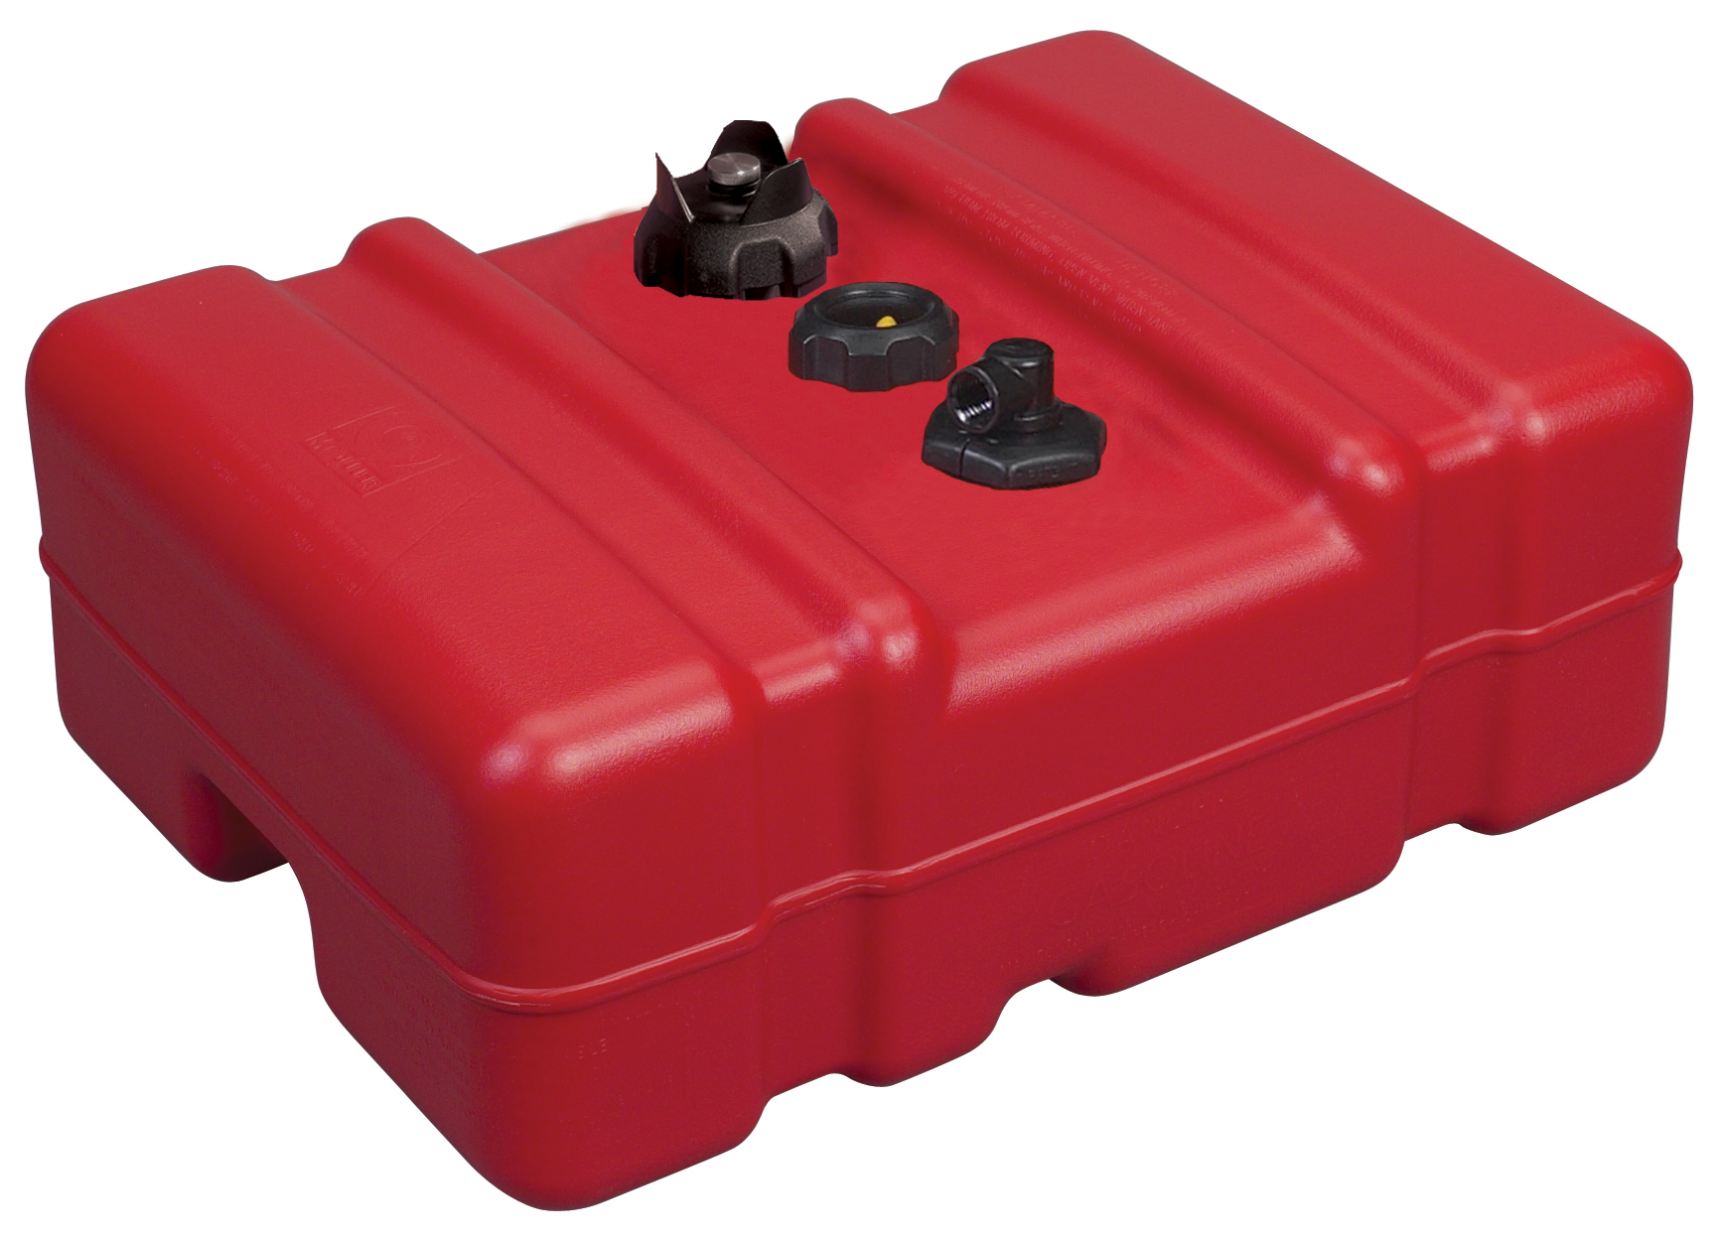 Rotomolding petrol jerry can military-spec fuel tank army gasoline diesel storage container